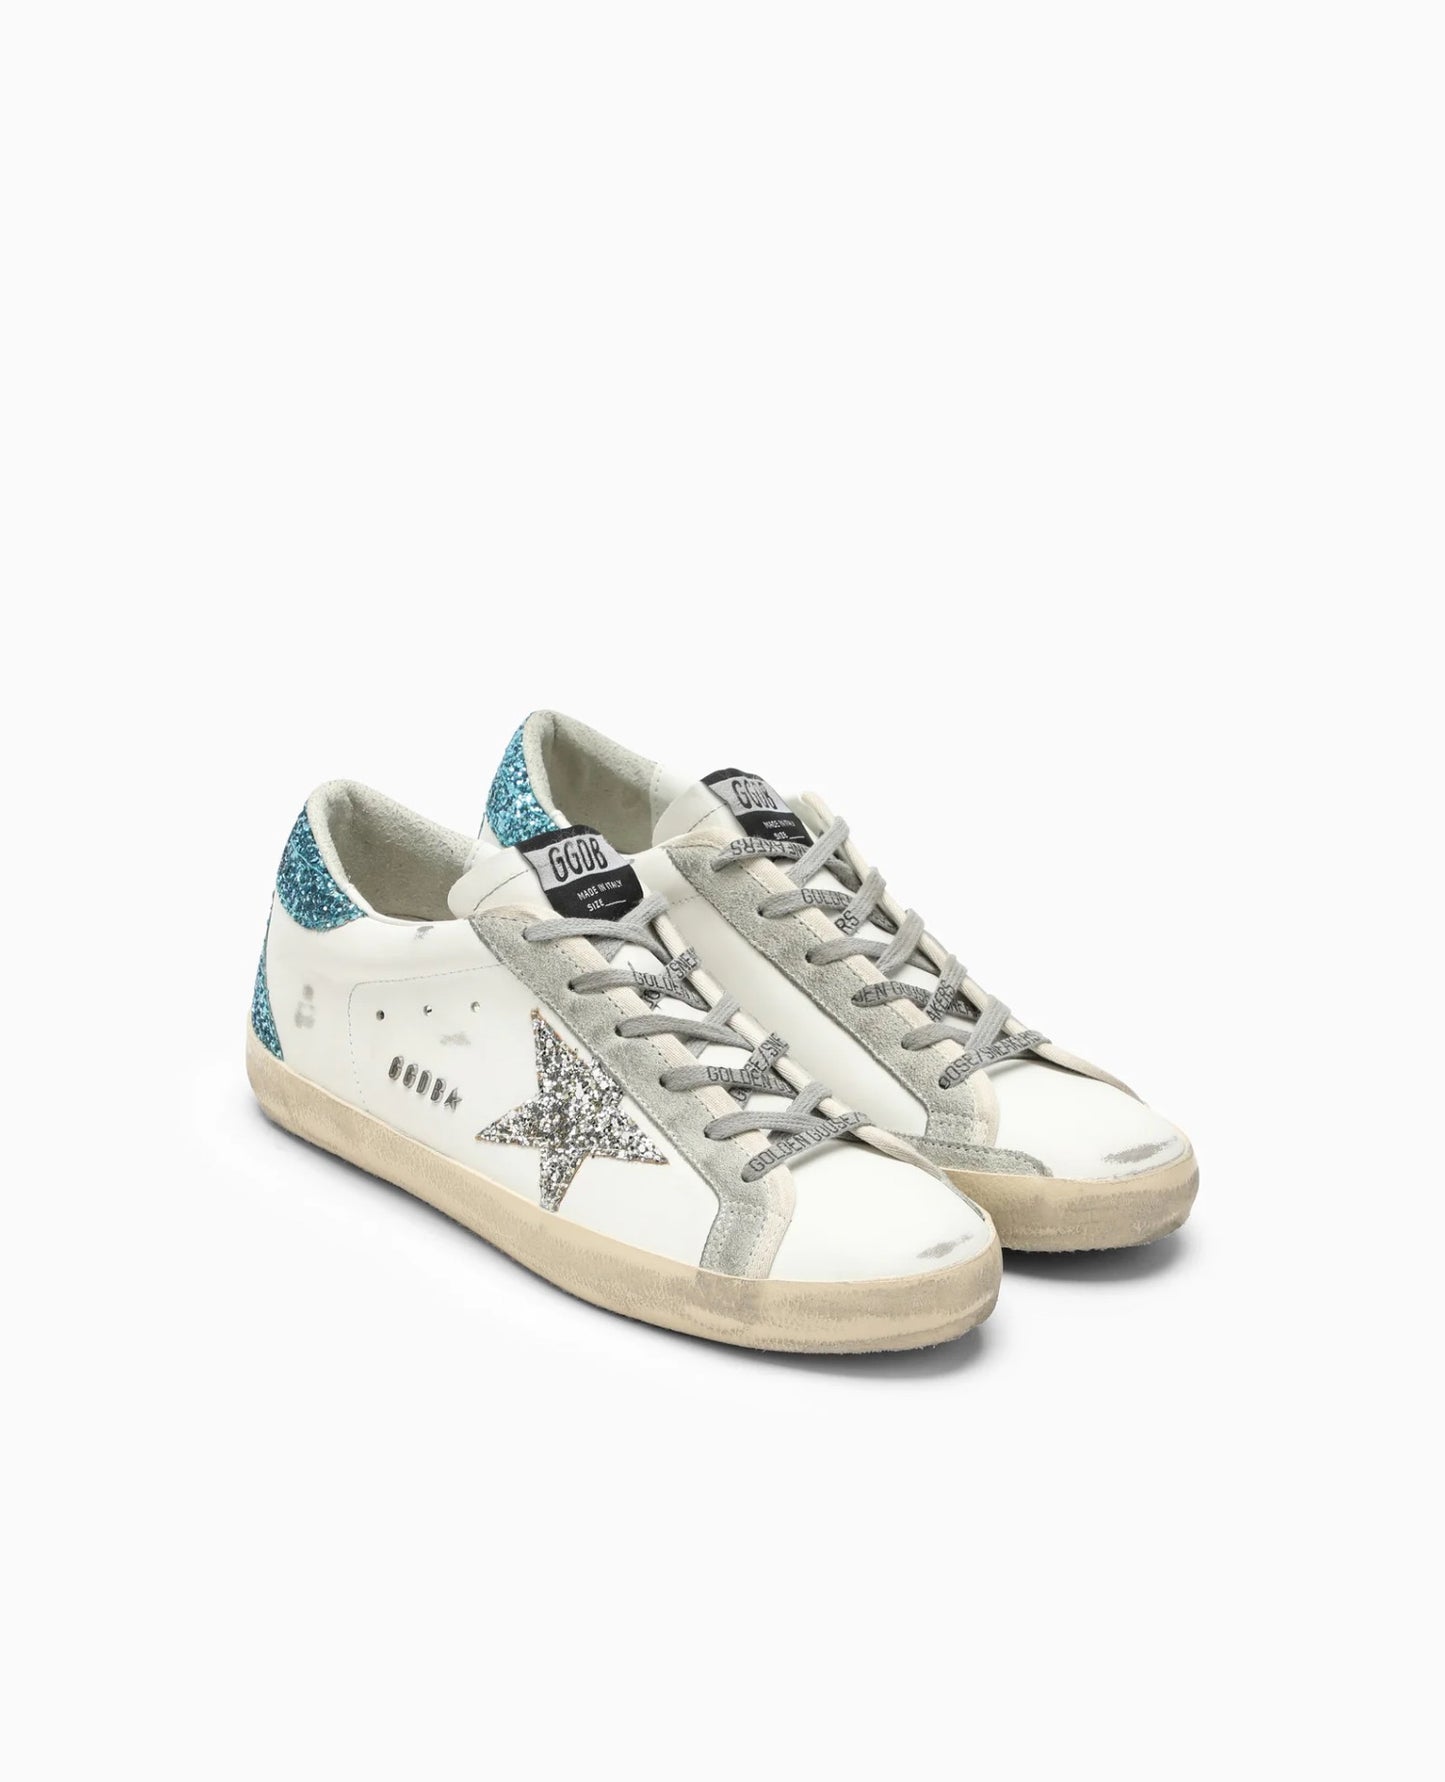 Golden Goose Women’s Super-Star with Silver Star and Turquoise glitter heel tab